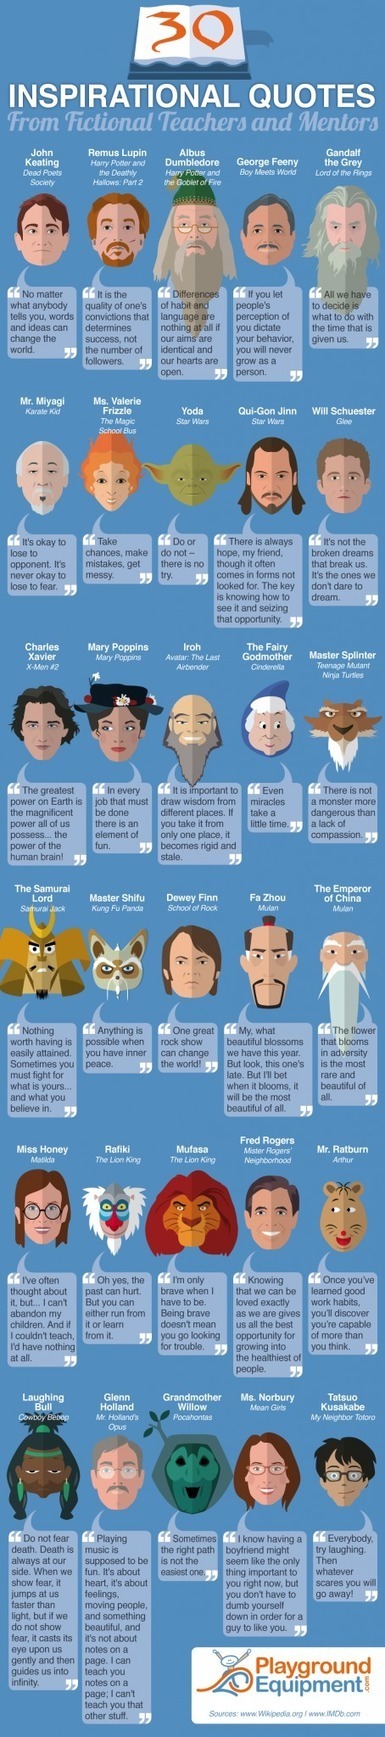 30 Inspirational Quotes from Fictional Teachers and Mentors Infographic | DIGITAL LEARNING | Scoop.it